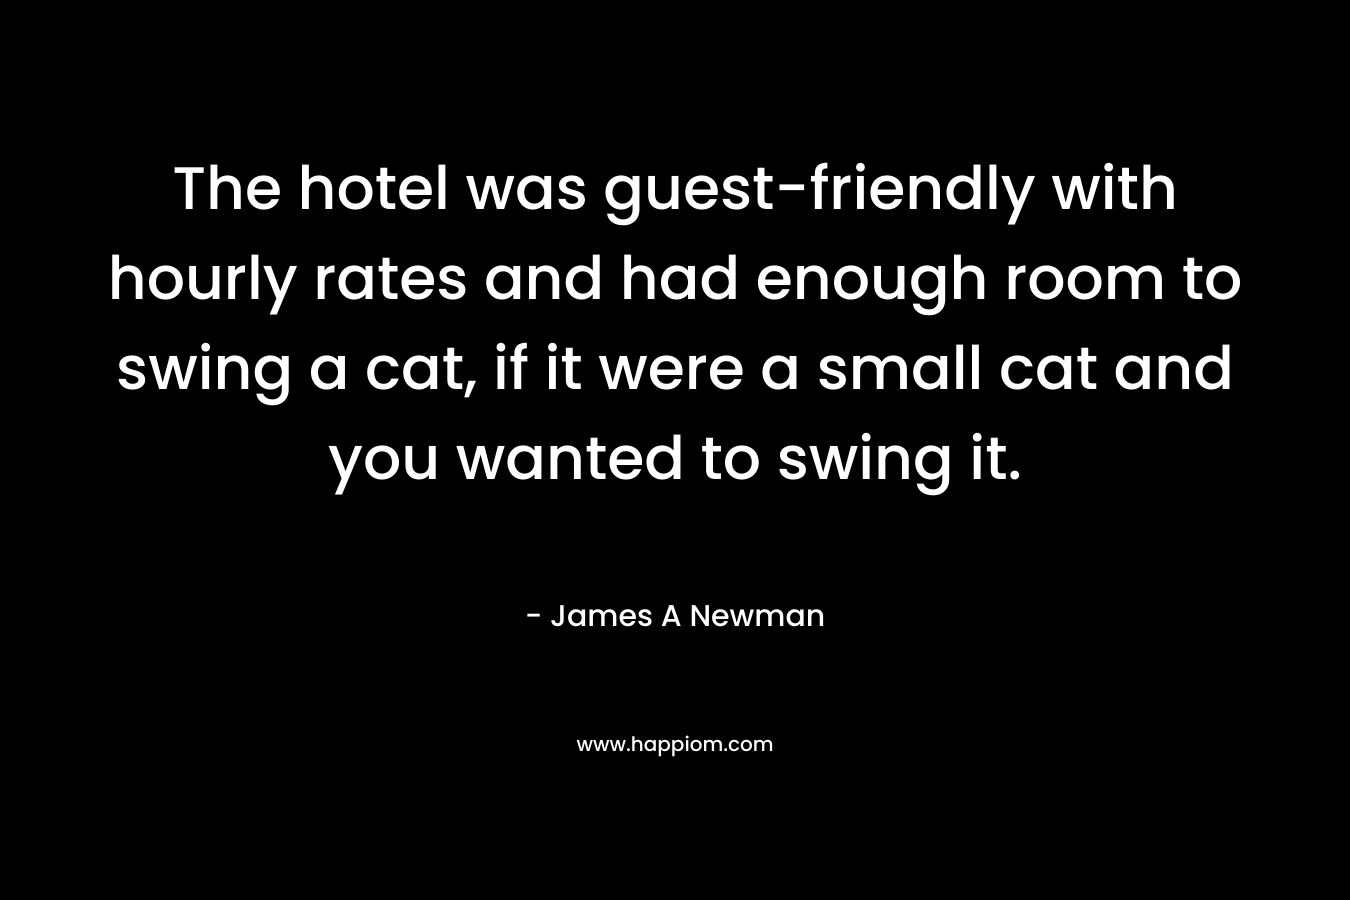 The hotel was guest-friendly with hourly rates and had enough room to swing a cat, if it were a small cat and you wanted to swing it.